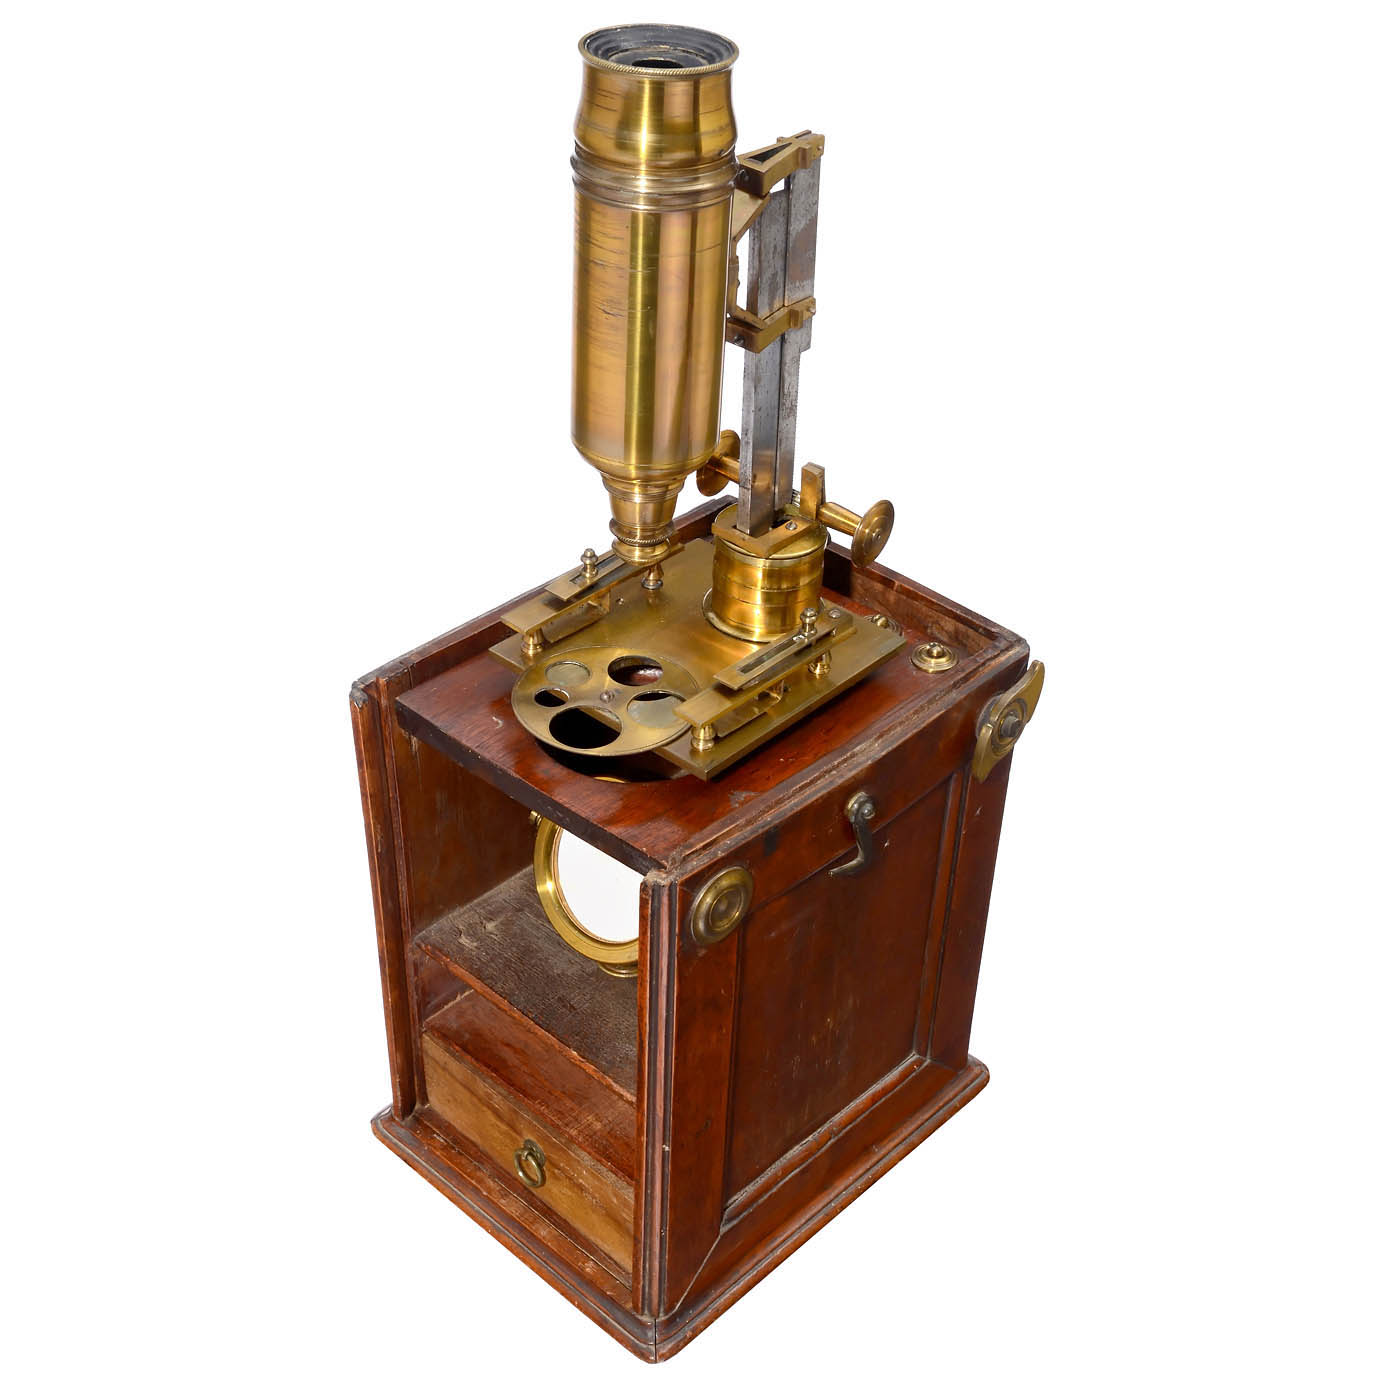 French Box Microscope, c. 1760 - Image 7 of 9